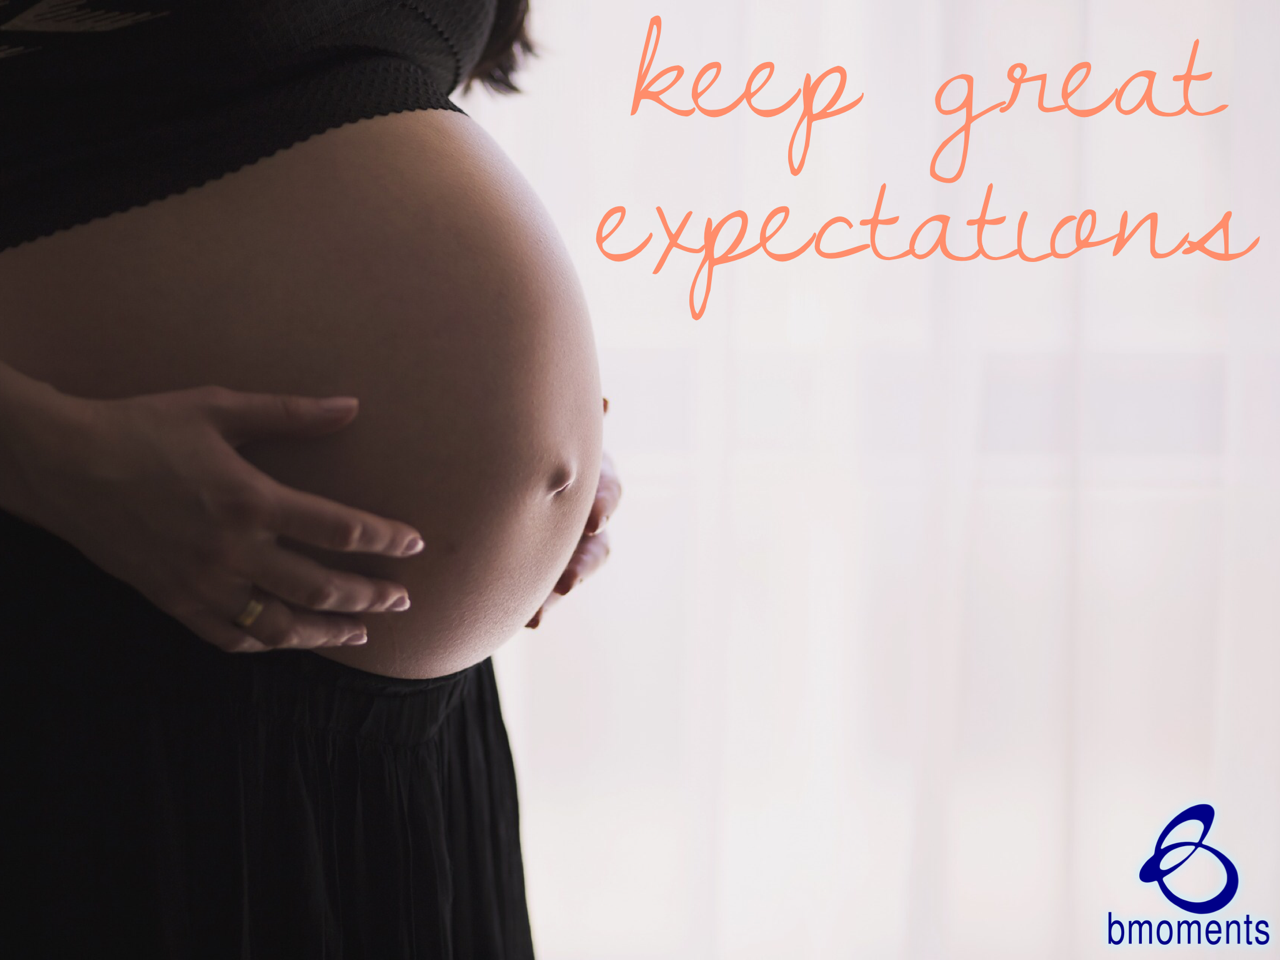 Become Pregnant with Great Expectations